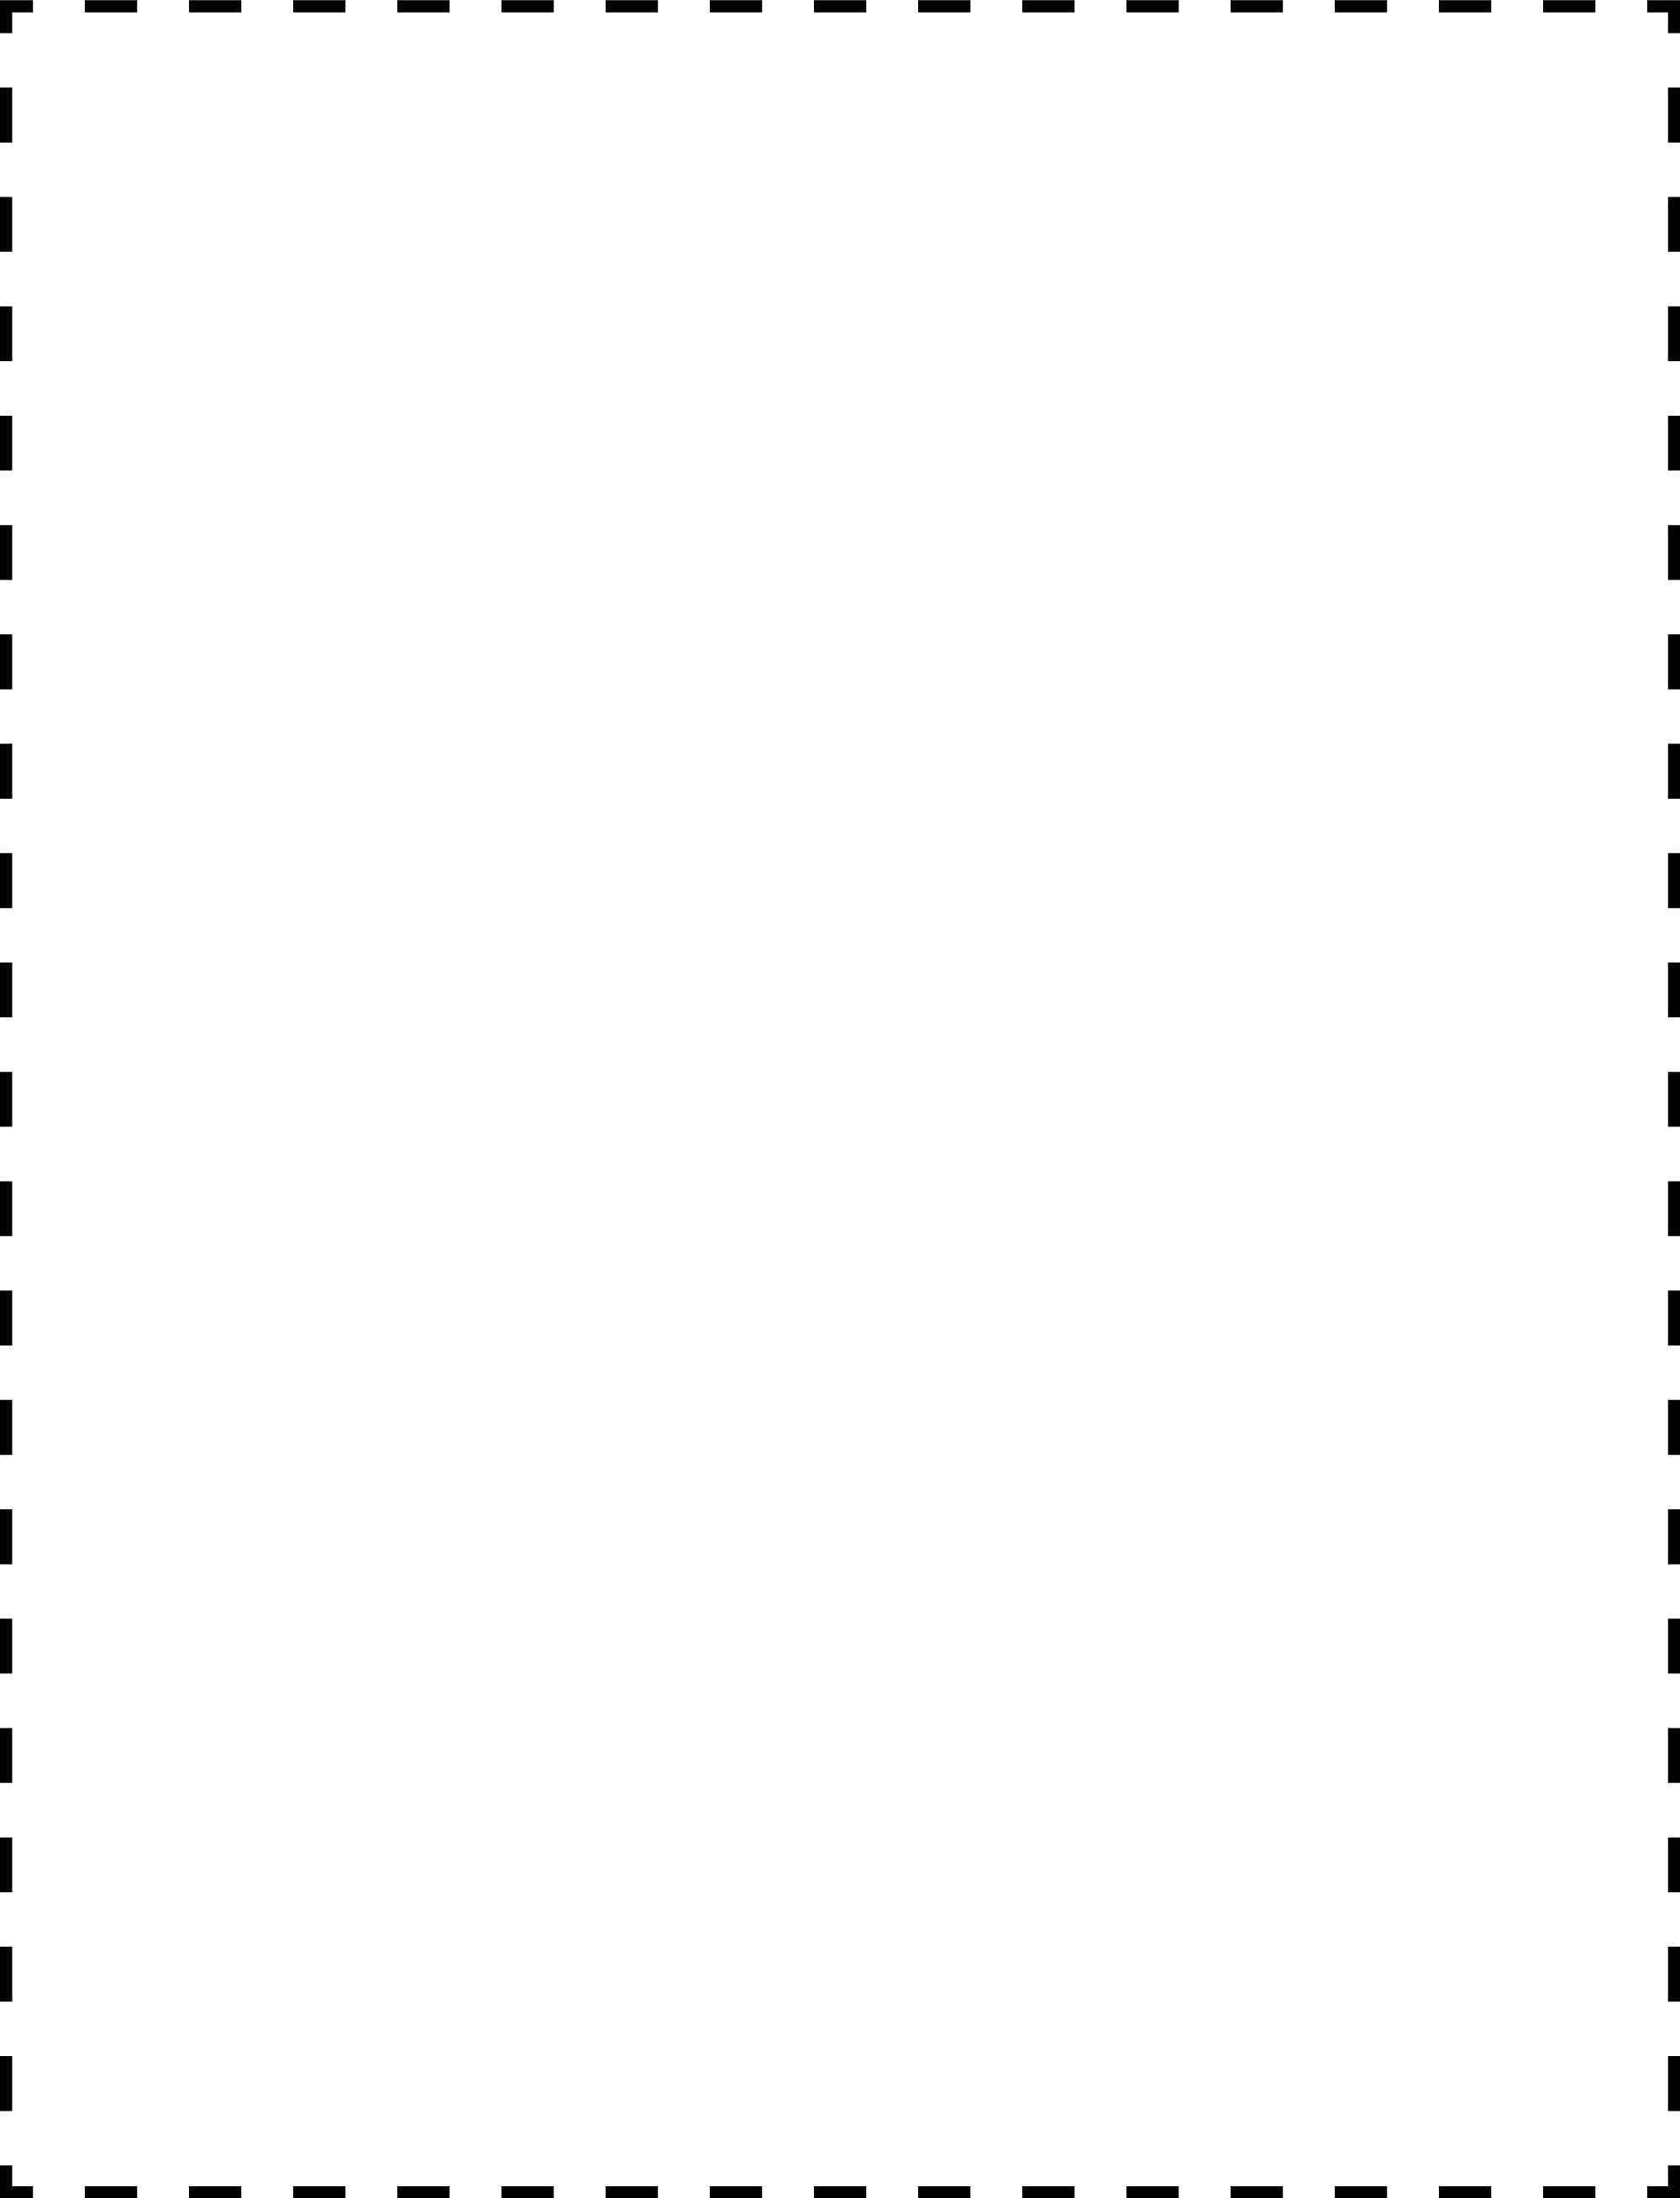 2649-coupon-outline-4x5-k.png